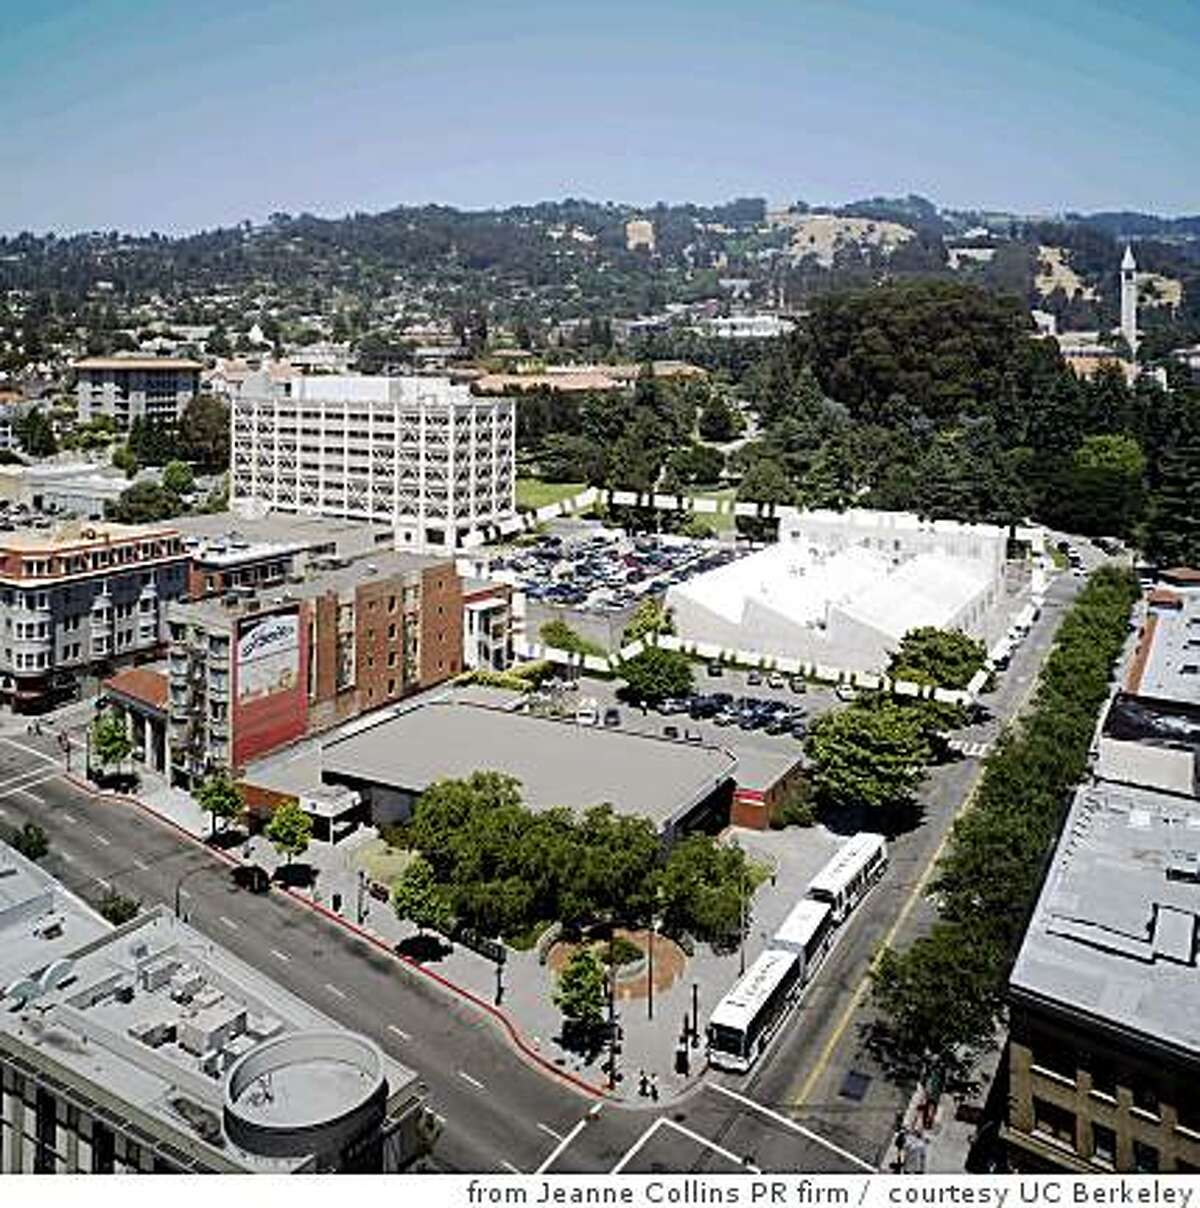 Photograph showing the block -- dotted line is site outline -- where UC Berkeley has proposed a new home for the Berkeley Art Museum and the Pacific Film Archive. The portion of the block in front of the dotted line is where a mixed-use tower with a conference center might go. The campus is in the background